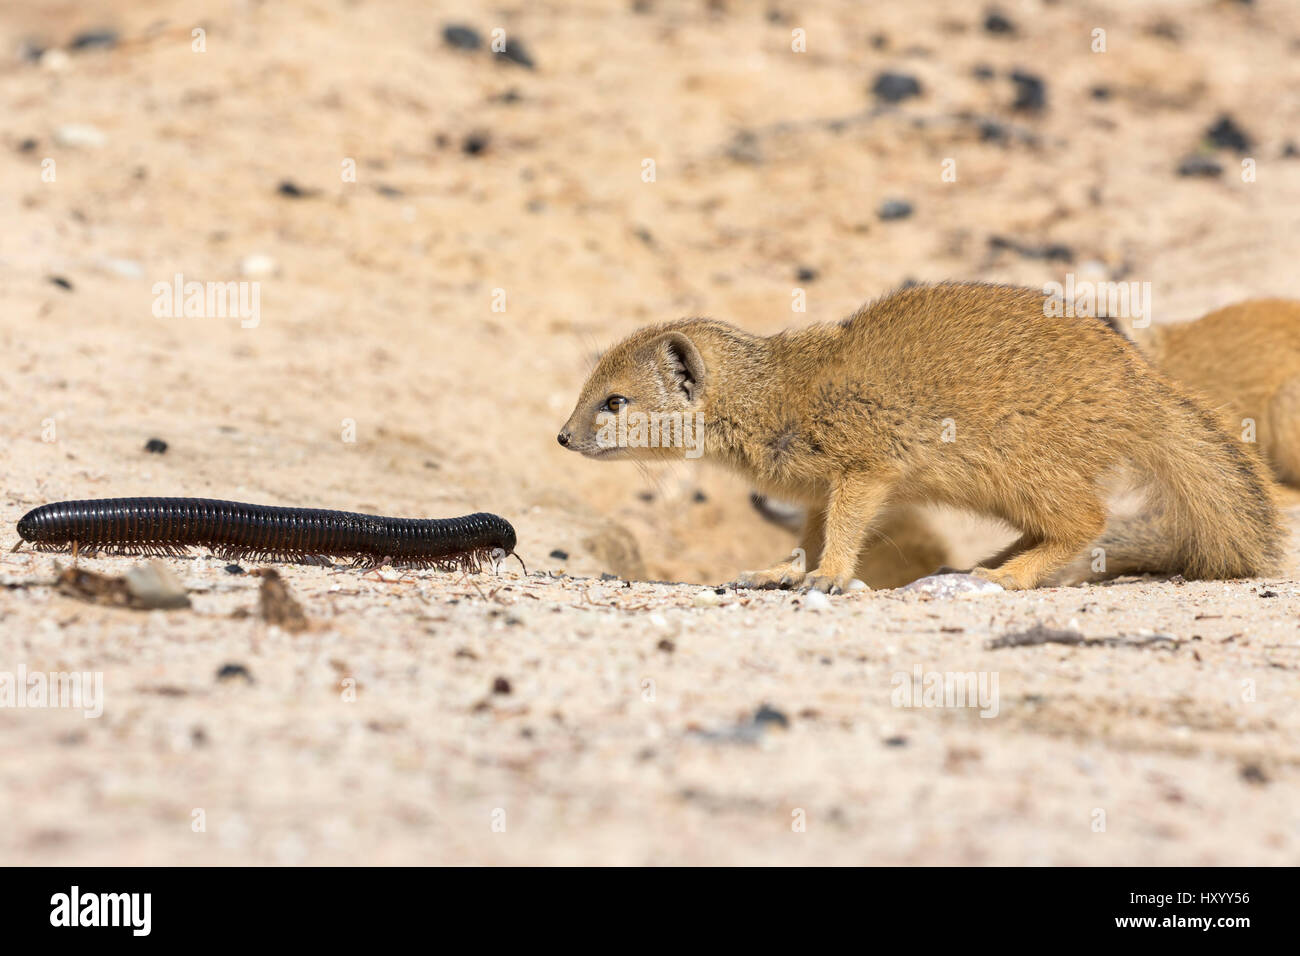 Young Yellow mongoose (Cynictis penicillata) investigating giant African millipede (Archispirostreptus gigas), Kgalagadi Transfrontier Park, Northern Cape, South Africa, January. Stock Photo